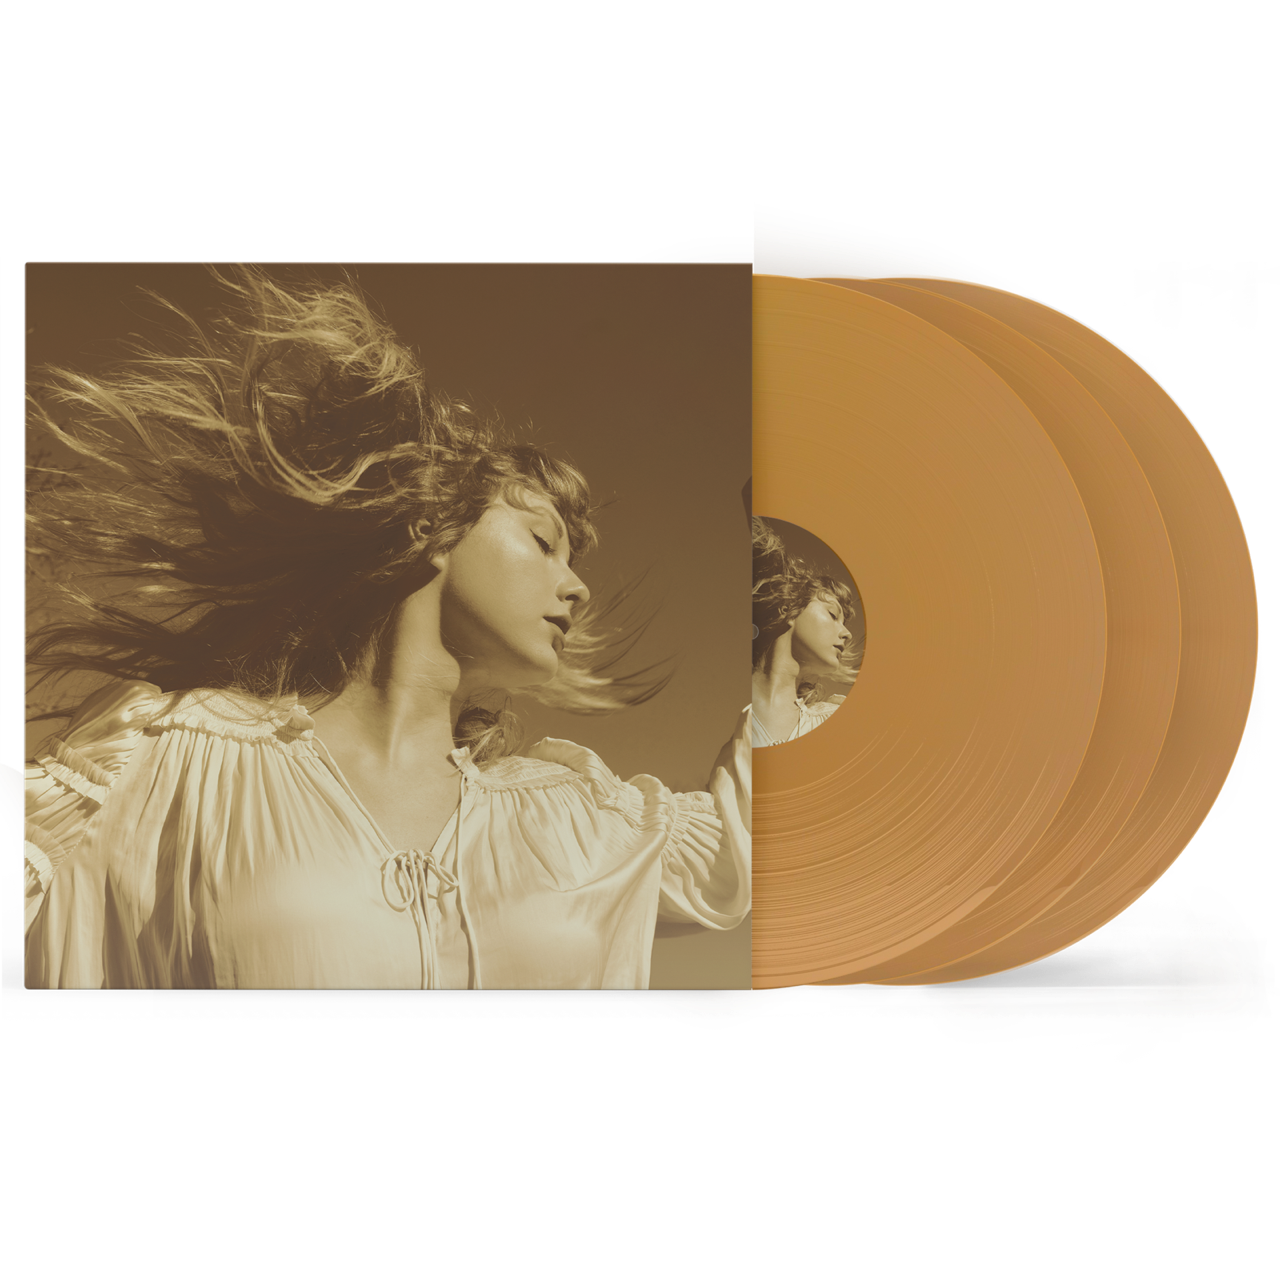 Chris Larson: Land Speed Record Limited Edition Clear Vinyl with